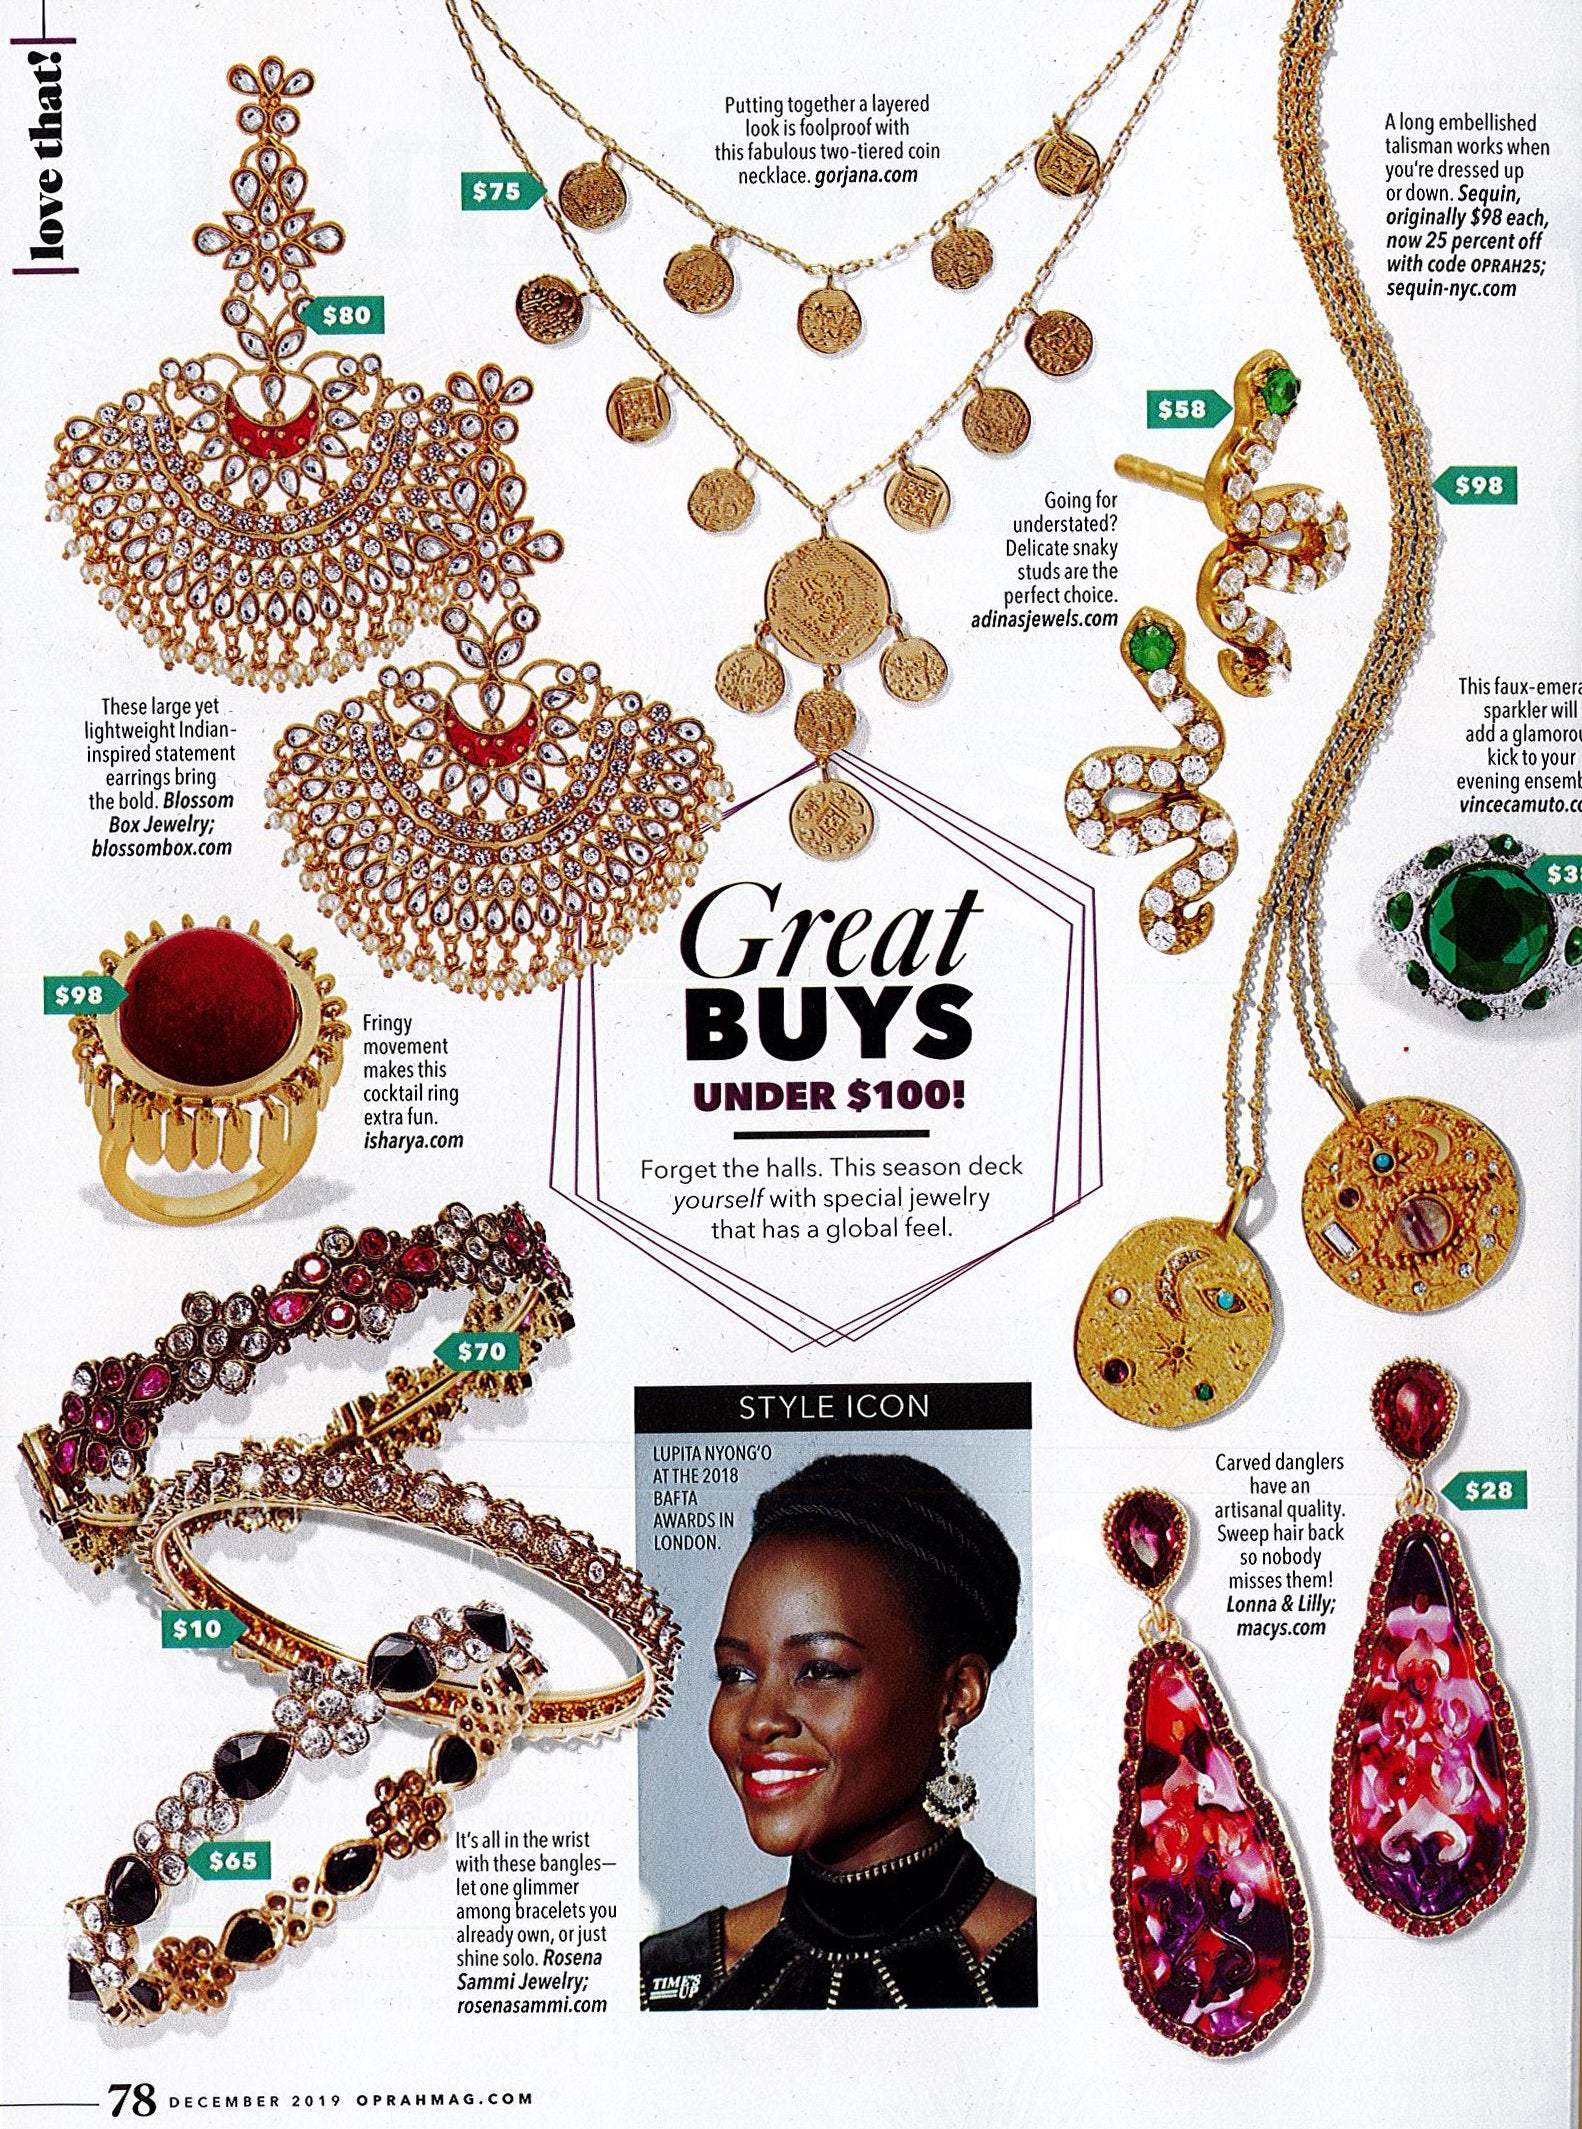 Sequin Featured in Oprah's Favorite Things Issue